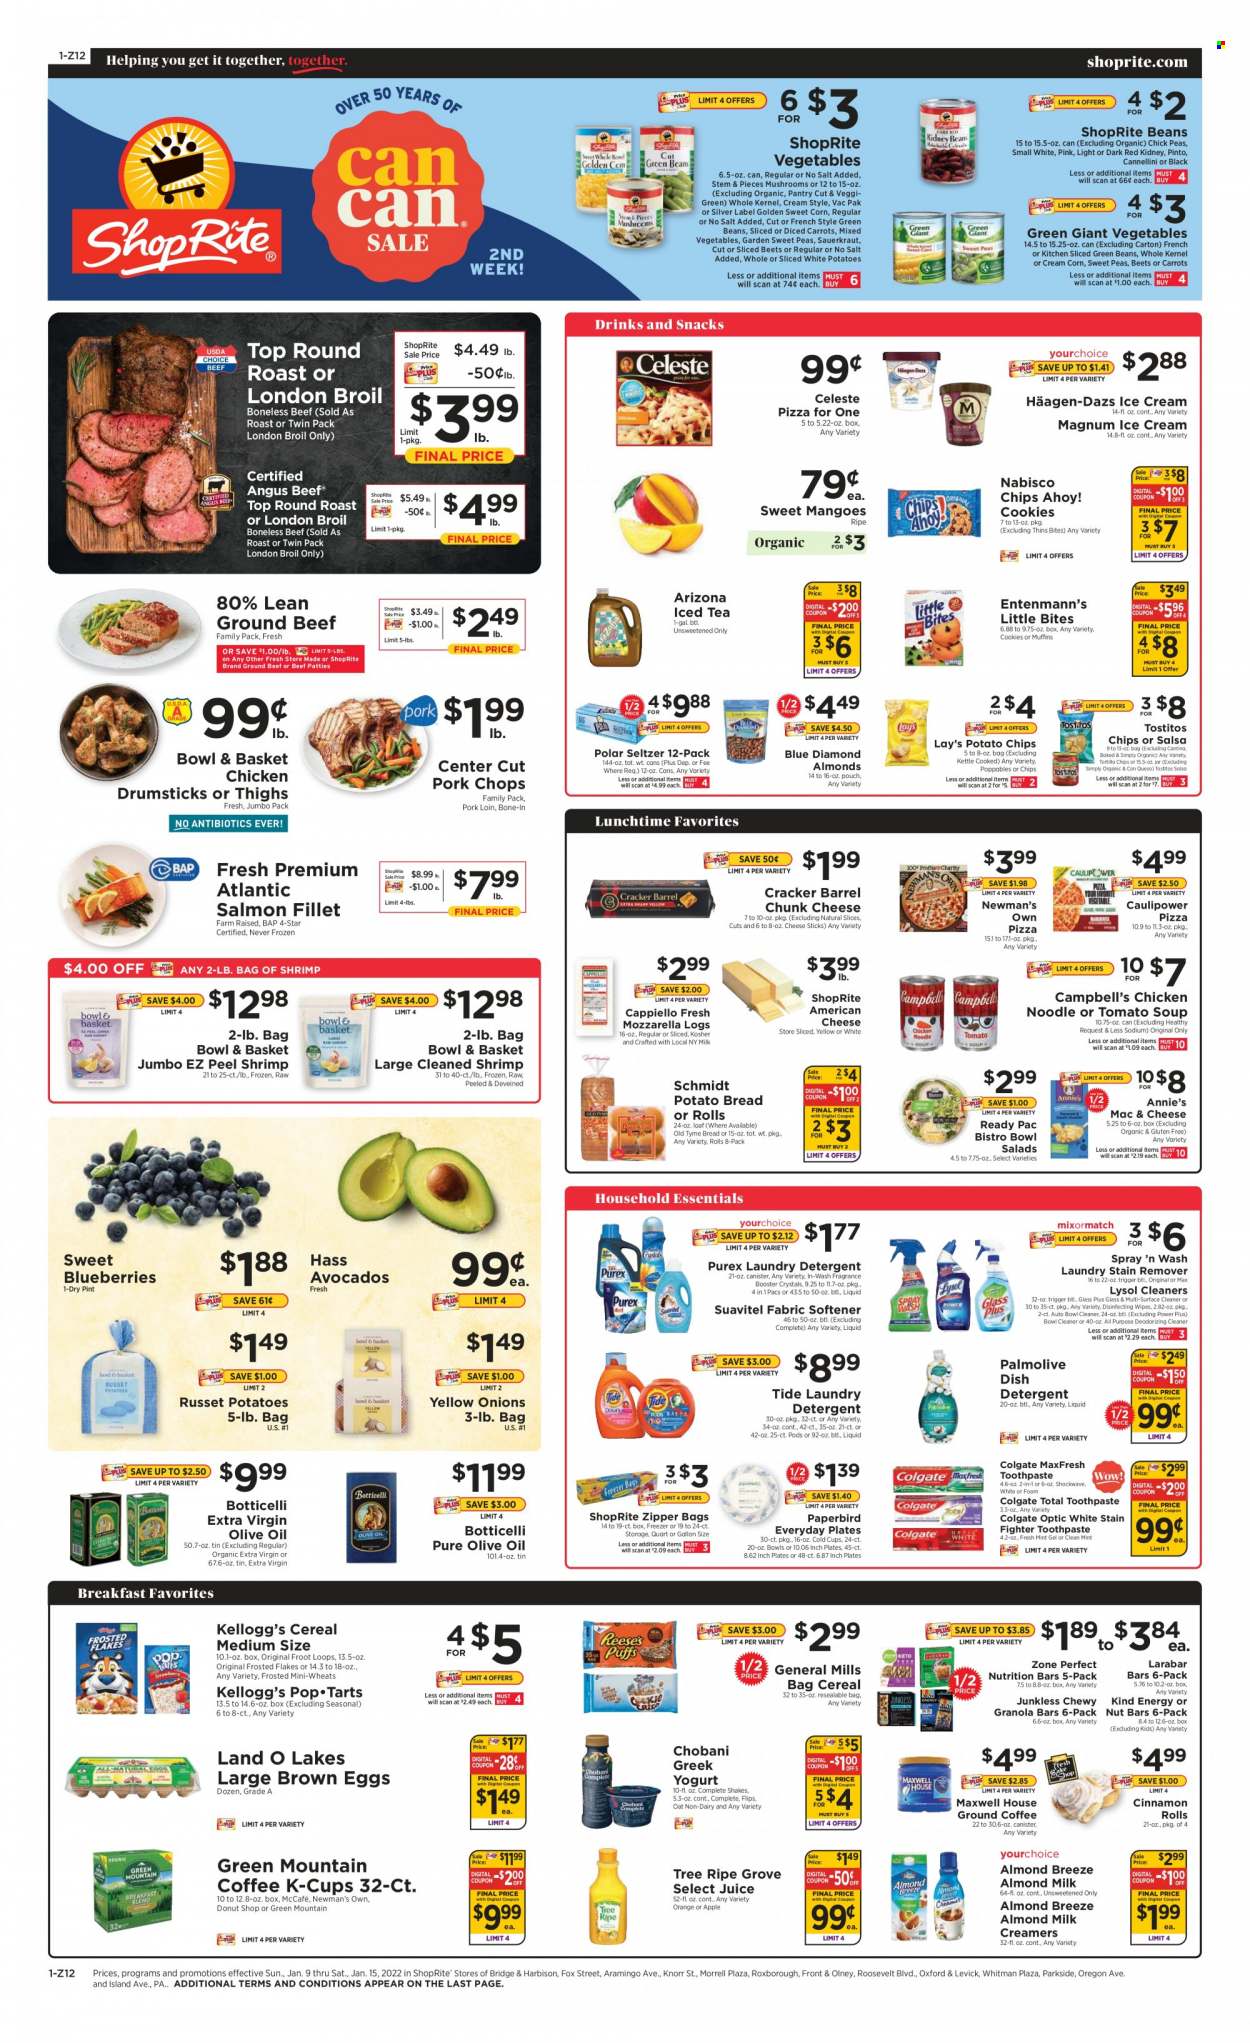 thumbnail - ShopRite Flyer - 01/09/2022 - 01/15/2022 - Sales products - bread, Bowl & Basket, cinnamon roll, Entenmann's, corn, green beans, russet potatoes, sweet corn, avocado, blueberries, oranges, salmon, salmon fillet, shrimps, Campbell's, tomato soup, pizza, soup, Knorr, noodles, Annie's, Ready Pac, american cheese, chunk cheese, greek yoghurt, yoghurt, Chobani, Almond Breeze, shake, eggs, almond creamer, ice cream, Häagen-Dazs, mixed vegetables, cheese sticks, Celeste, cookies, crackers, Kellogg's, Chips Ahoy!, Little Bites, tortilla chips, potato chips, Lay’s, Thins, Tostitos, oats, sauerkraut, cereals, nutrition bar, nut bar, granola bar, Frosted Flakes, Zone Perfect, salsa, extra virgin olive oil, olive oil, oil, Blue Diamond, juice, ice tea, AriZona, seltzer water, Maxwell House, coffee capsules, McCafe, K-Cups, Green Mountain, red wine, wine, chicken drumsticks, beef meat, ground beef, round roast, pork chops, pork loin, pork meat, wipes, detergent, surface cleaner, cleaner, stain remover, Lysol, Tide, fabric softener, laundry detergent, Purex, Palmolive, Colgate, toothpaste, fragrance, plate. Page 1.